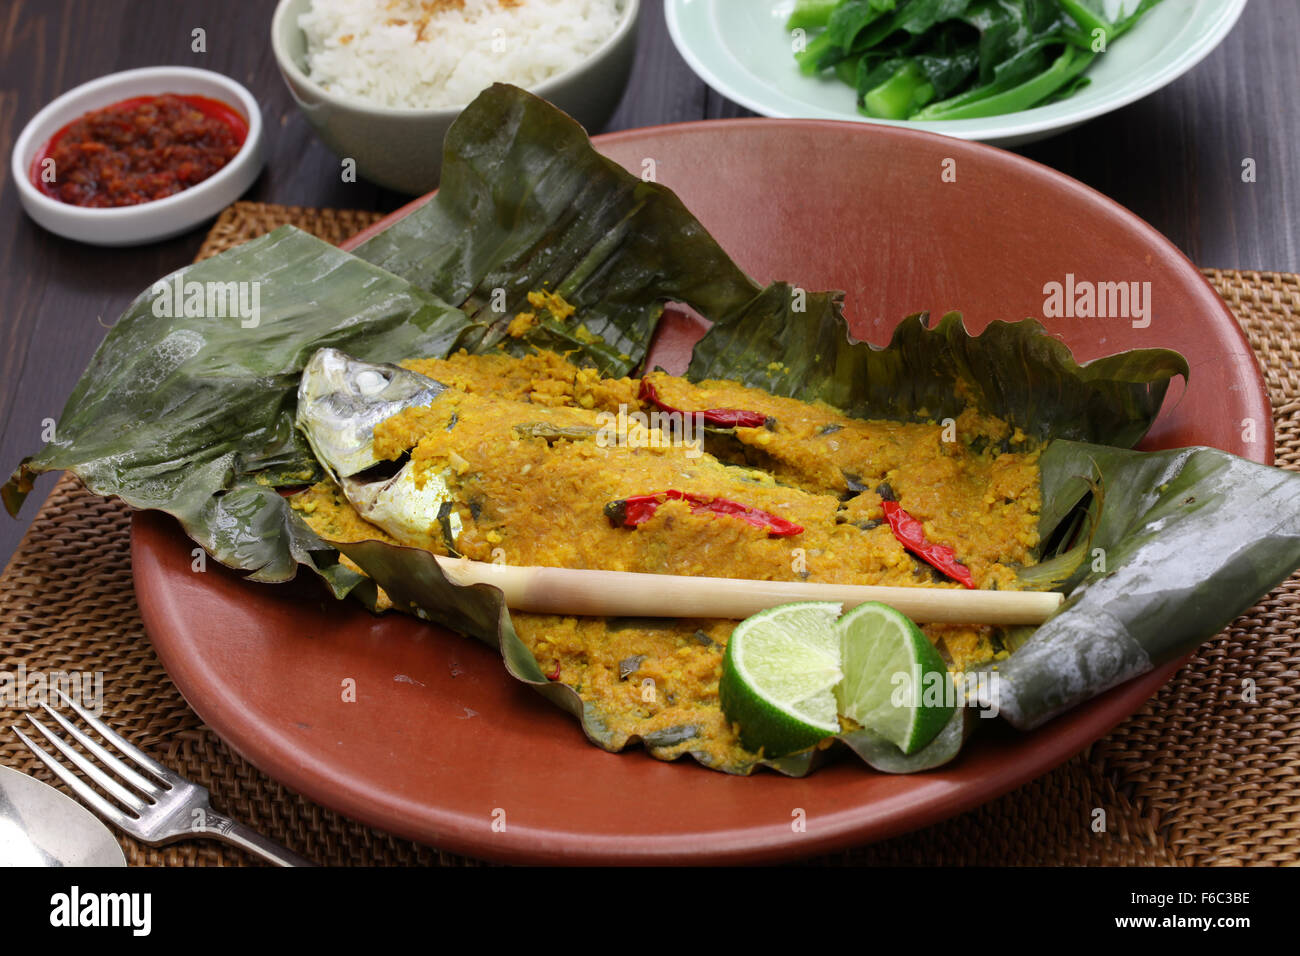 https://c8.alamy.com/comp/F6C3BE/ikan-pepes-indonesian-cuisine-steamed-fish-wrapped-in-banana-leaves-F6C3BE.jpg